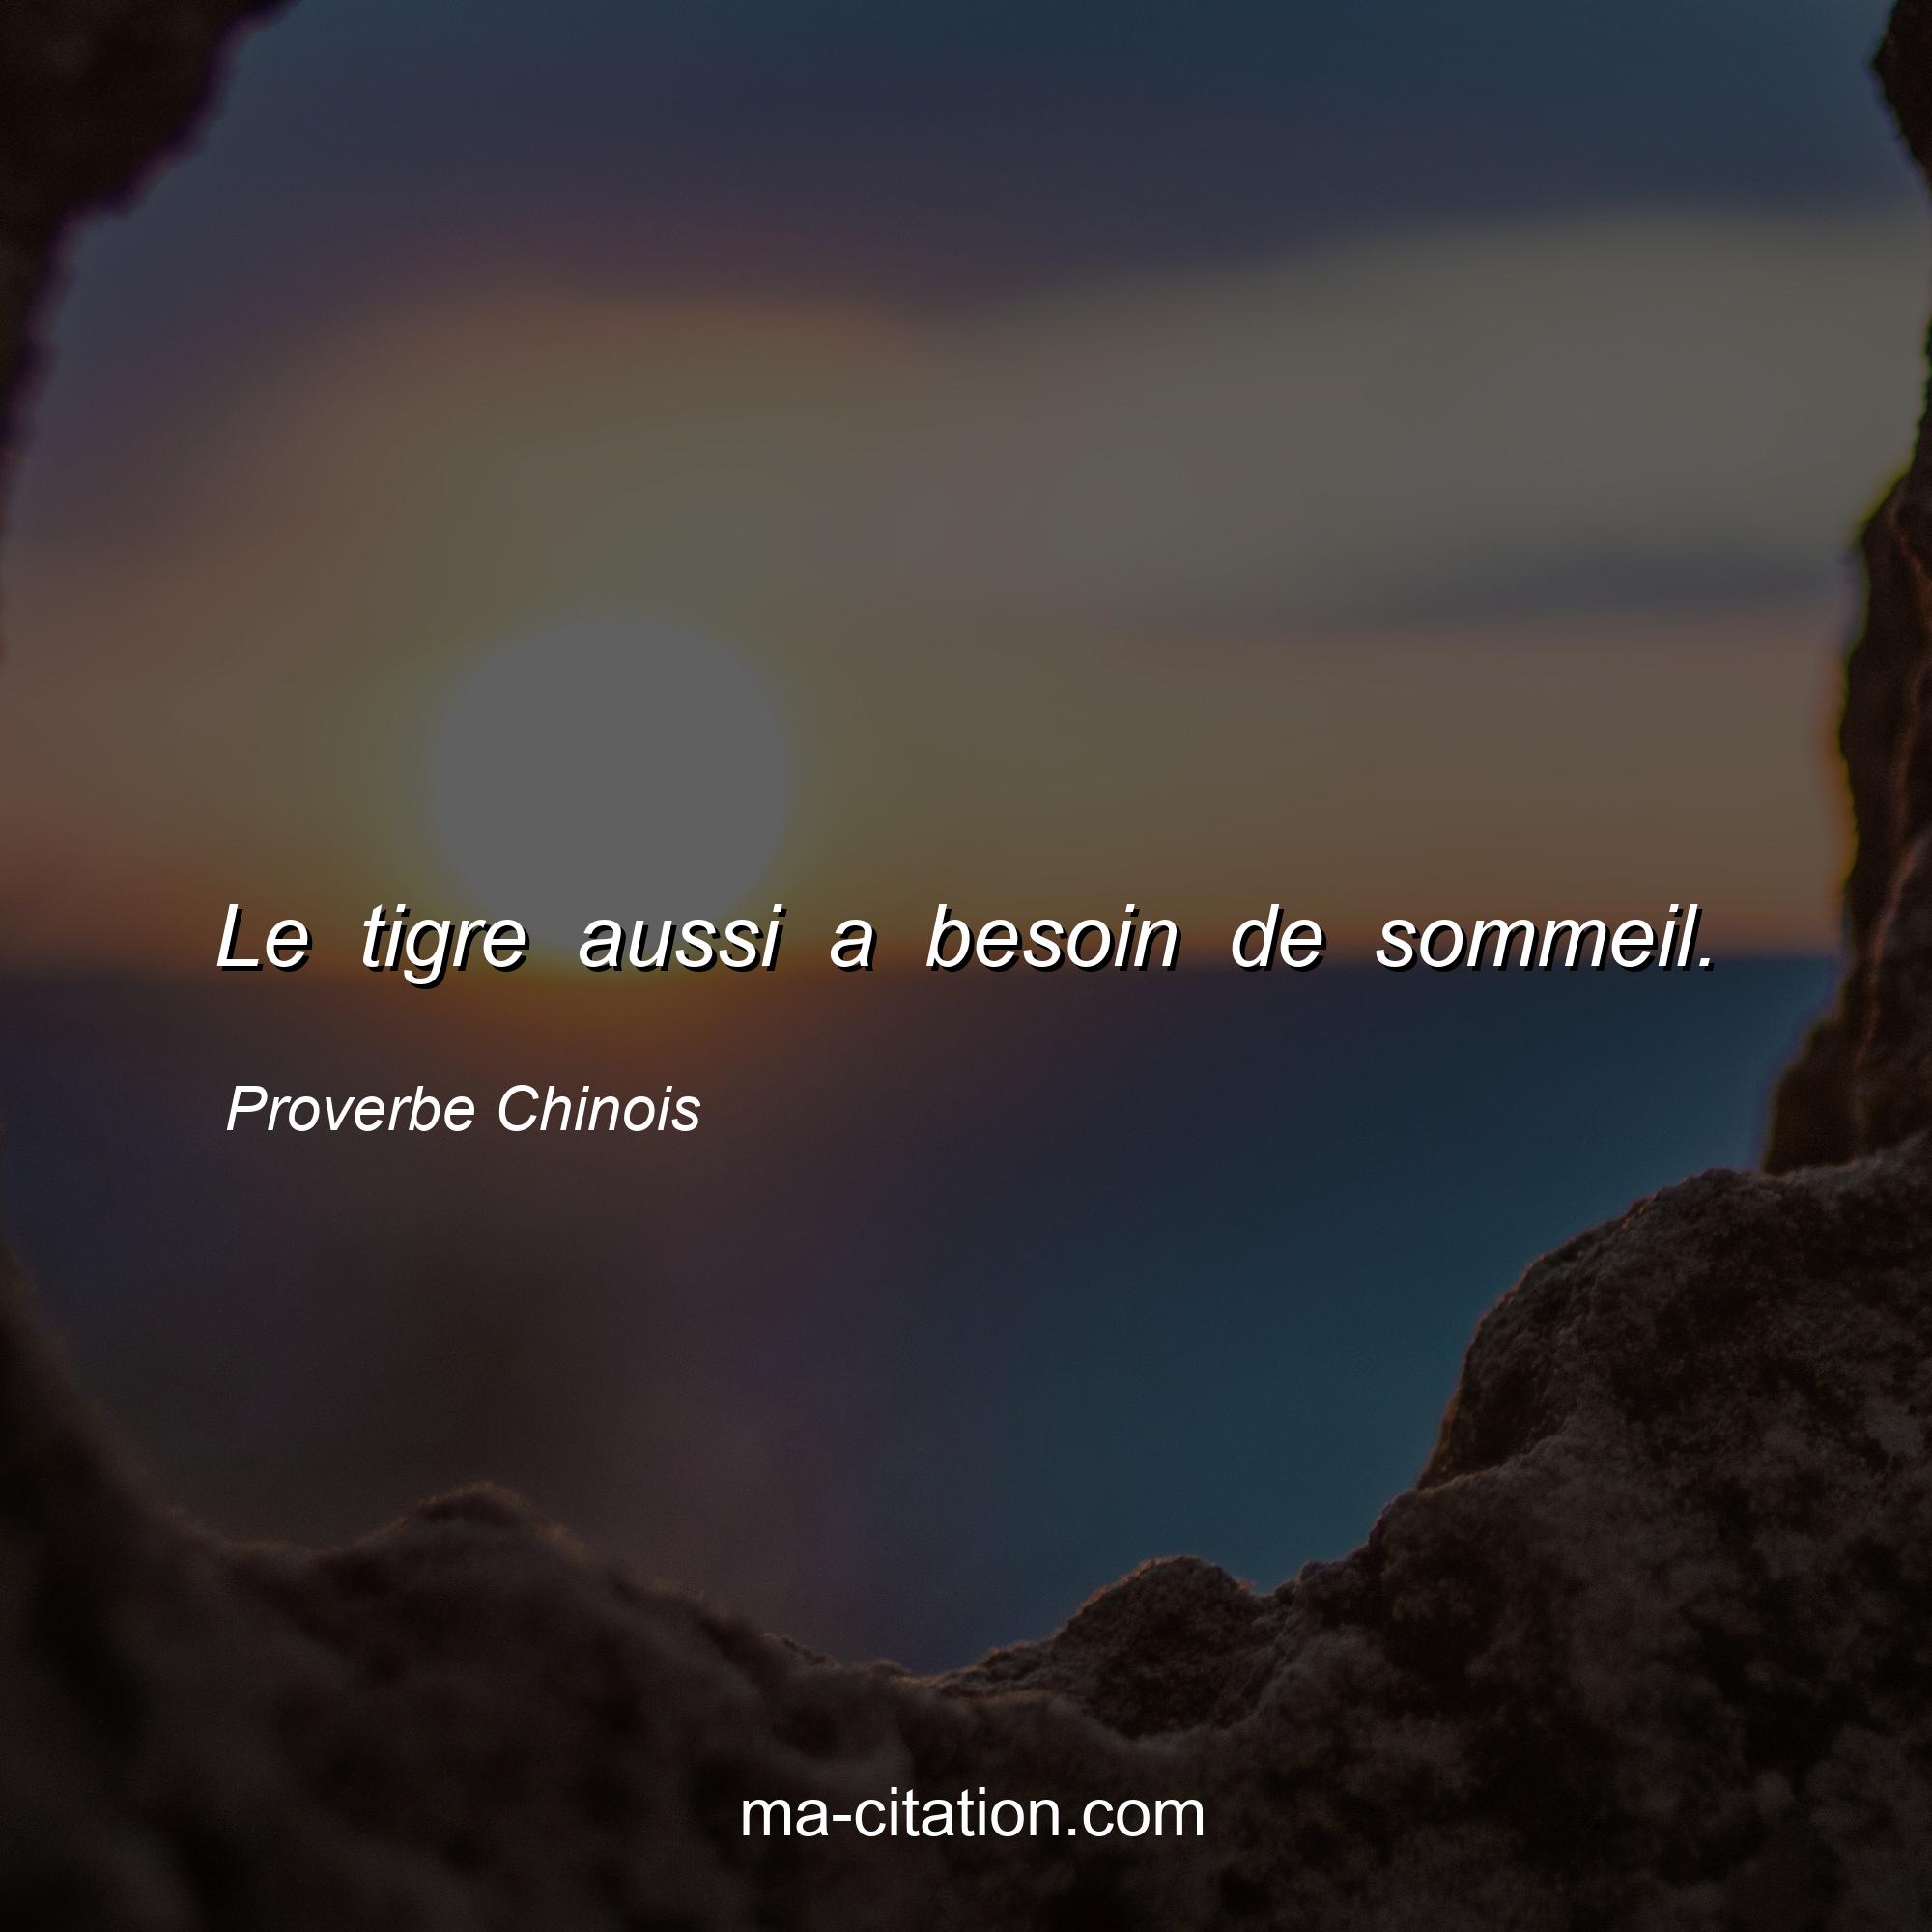 Proverbe Chinois : Le tigre aussi a besoin de sommeil.